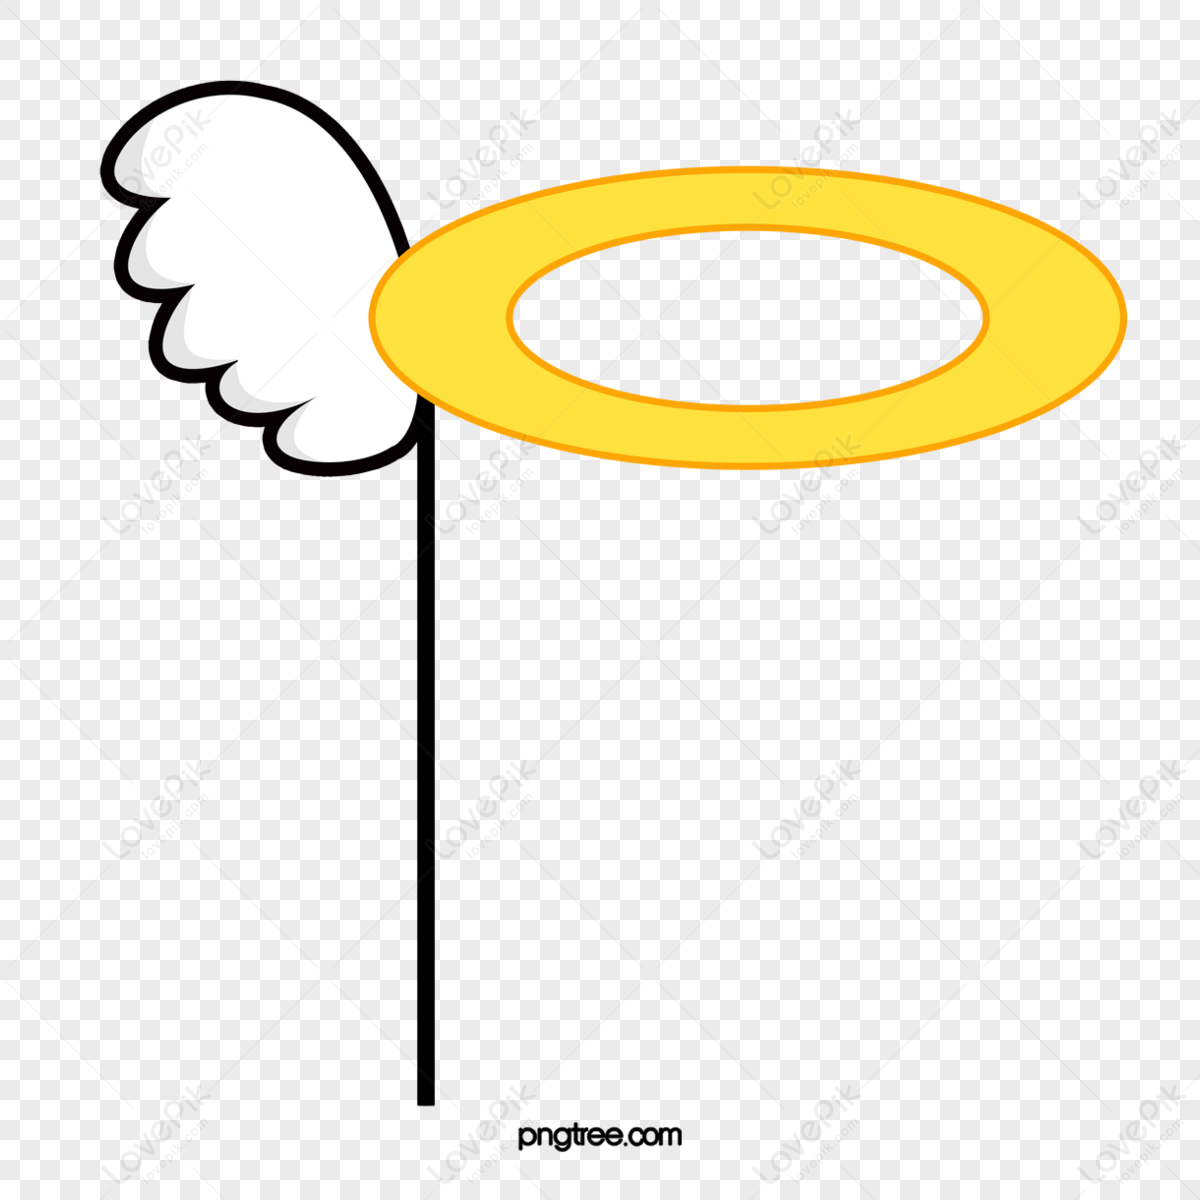 Halo Angel Ring Isolated Stock Illustration - Download Image Now - Halo -  Symbol, Vector, Angel - iStock